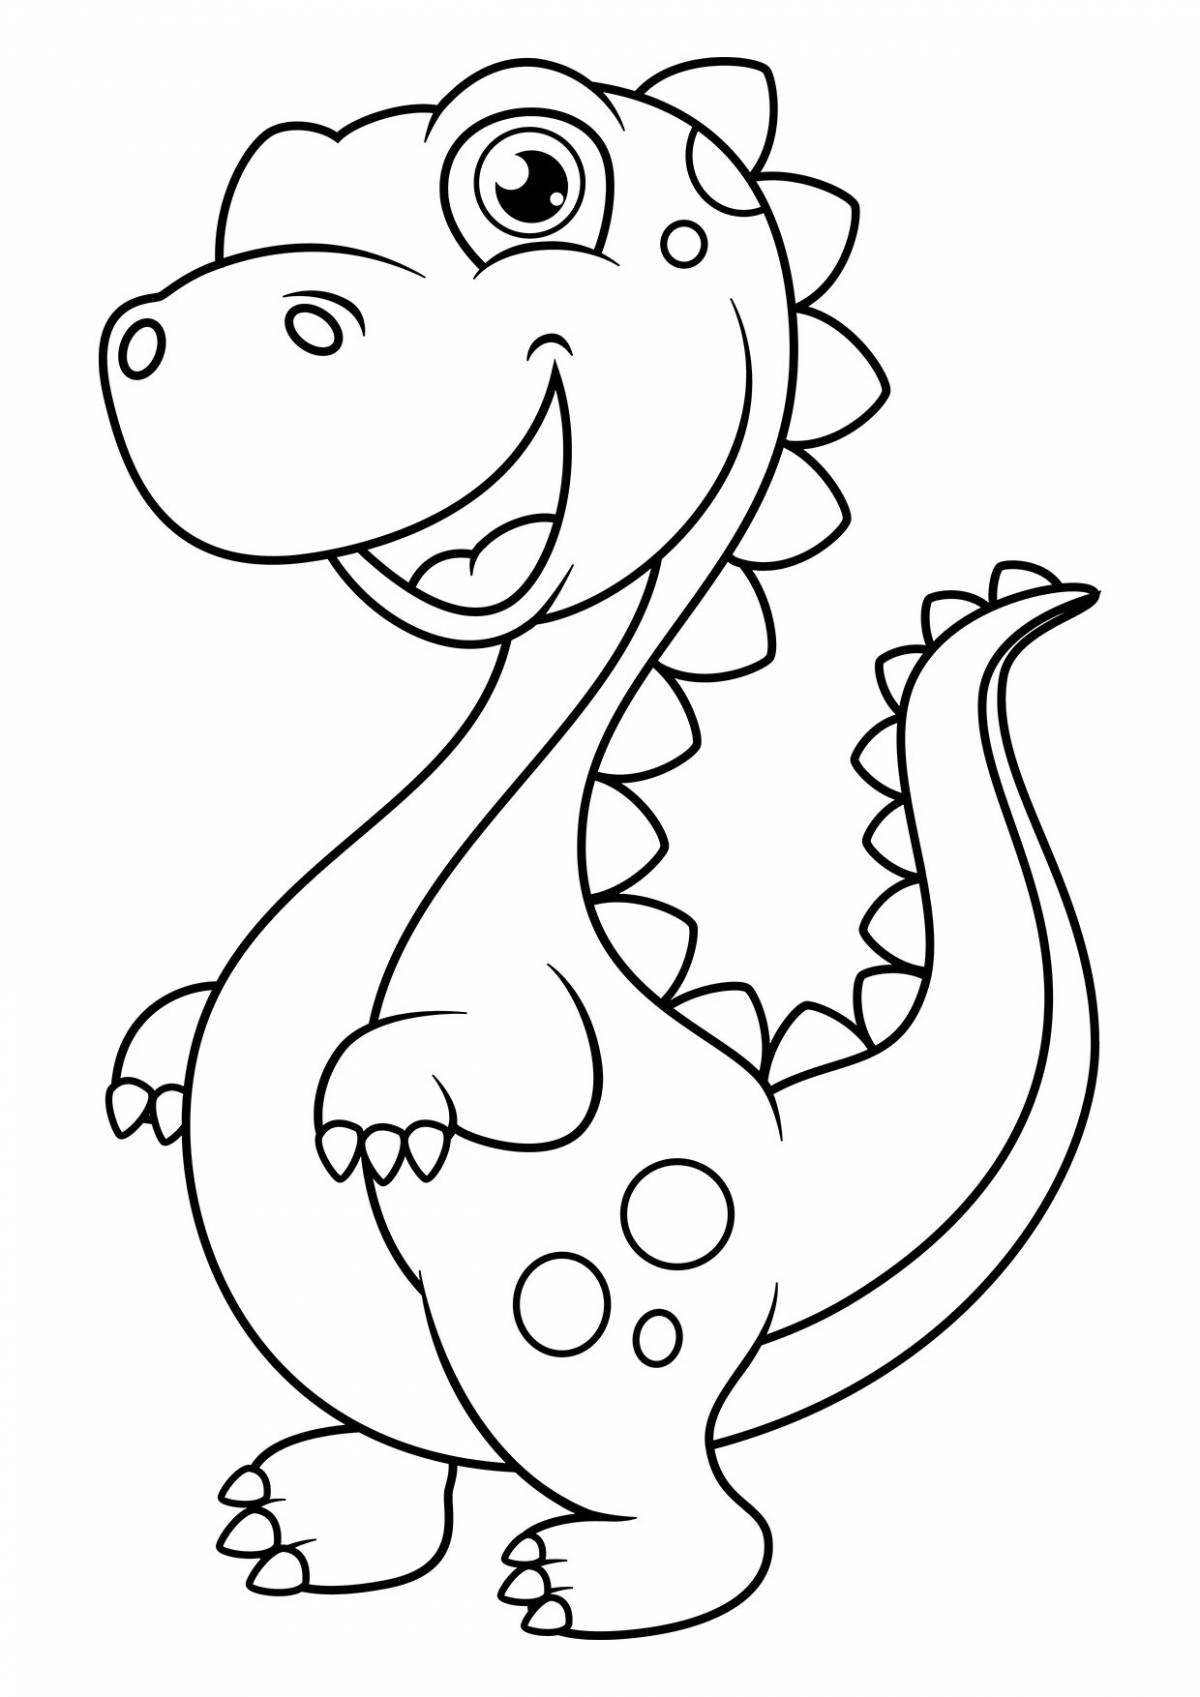 Bright dinosaurs coloring for children 3-4 years old